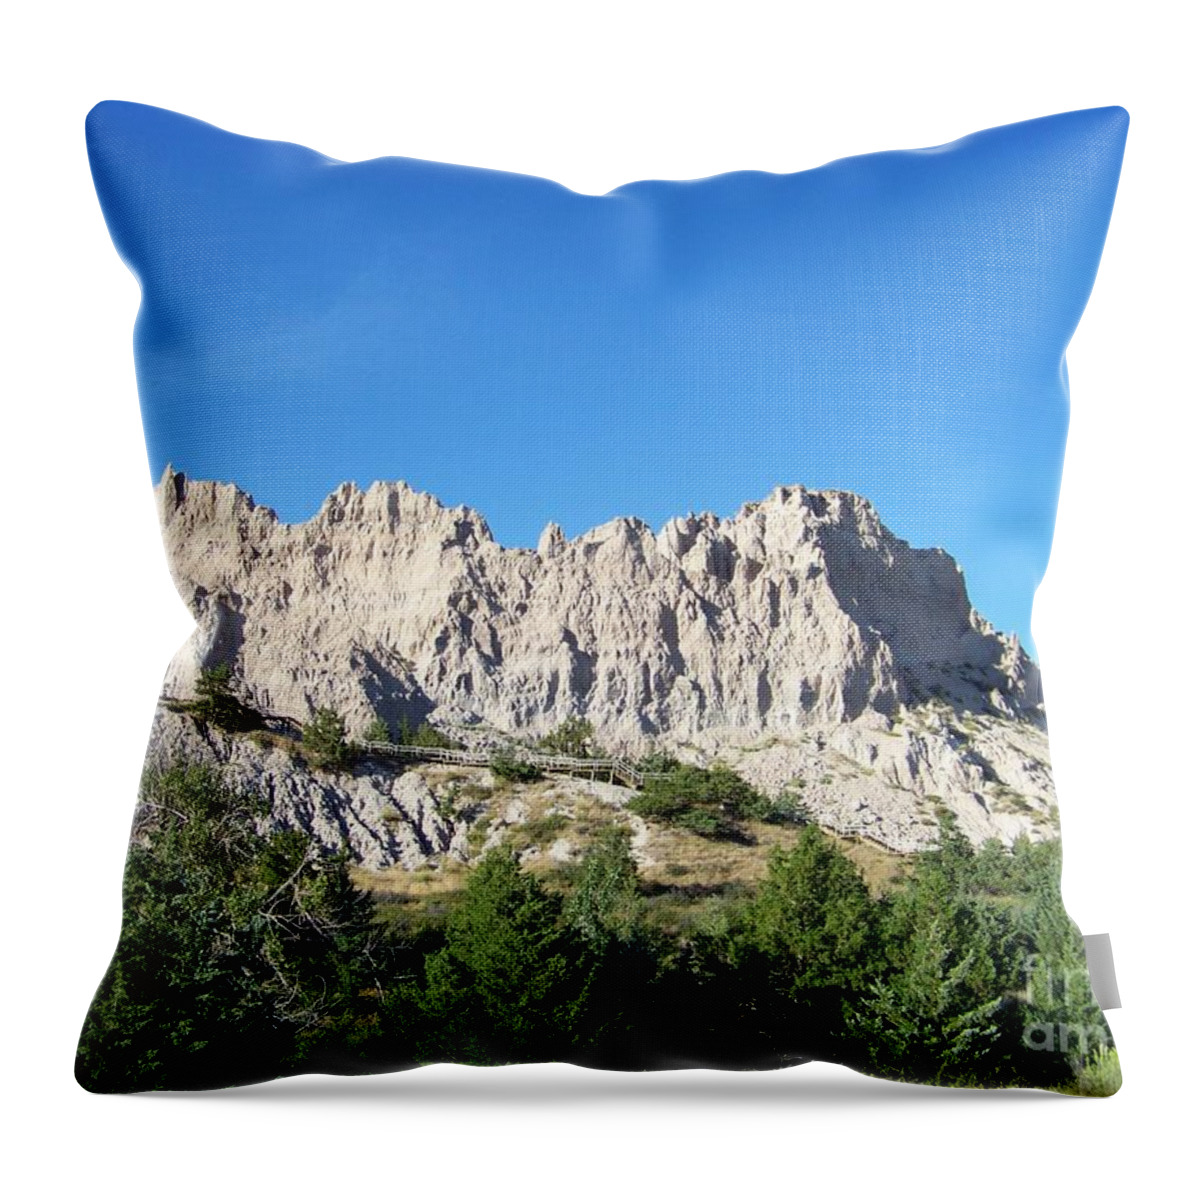 Badlands Throw Pillow featuring the photograph Badlands Slump by Charles Robinson